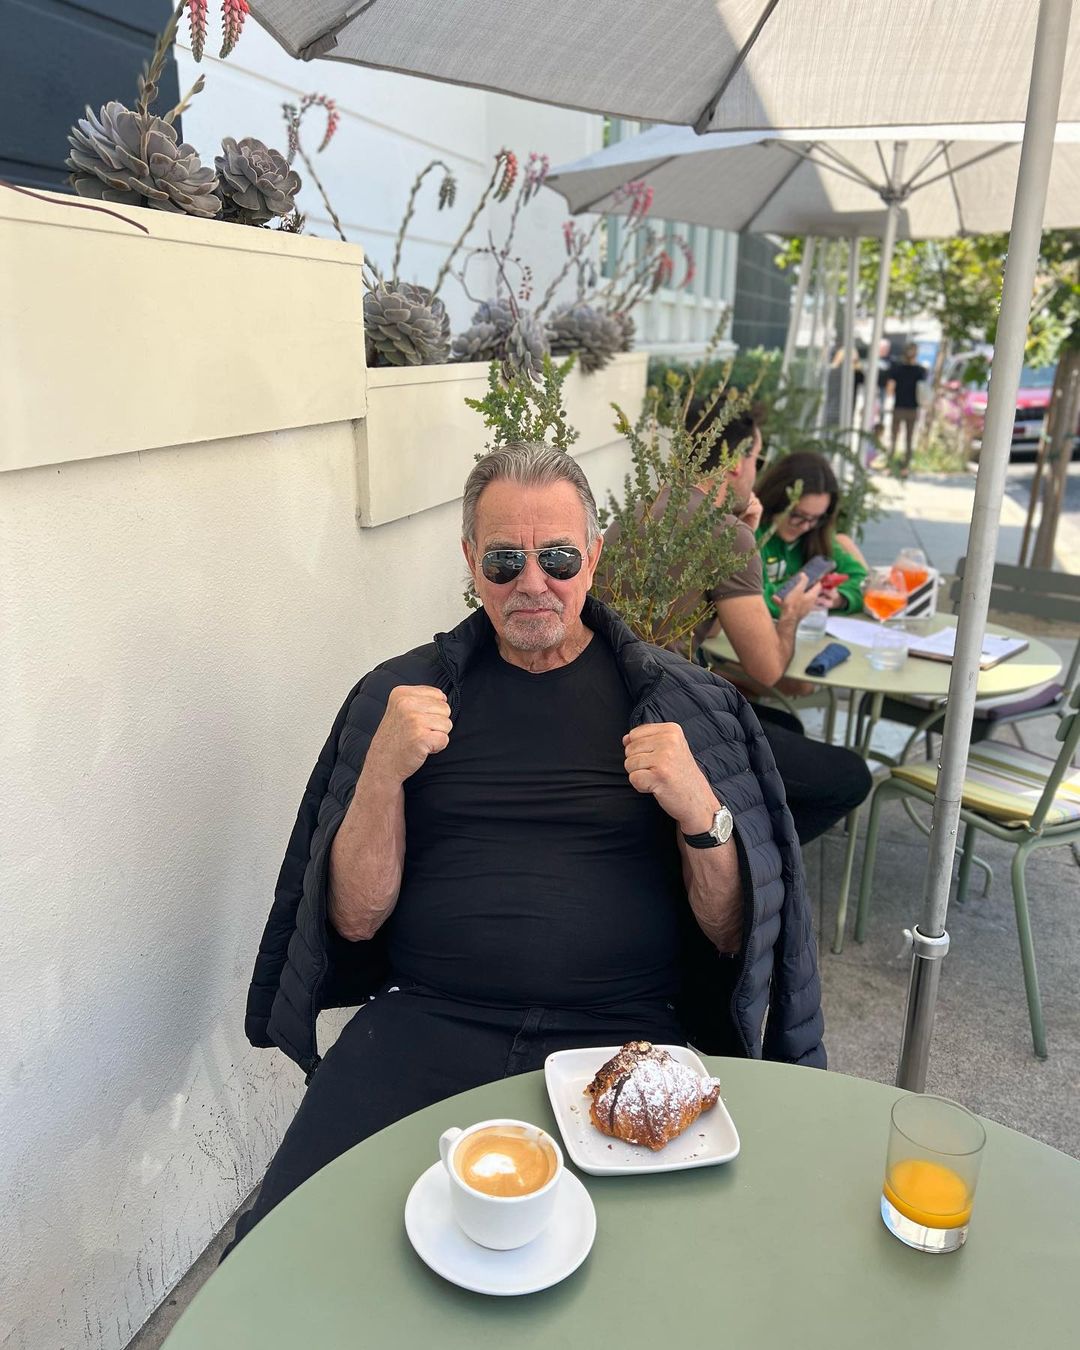 Eric Braeden enjoying his meal and giving a pose to the camera with his fist closed and black puffy jacket over his shoulder.